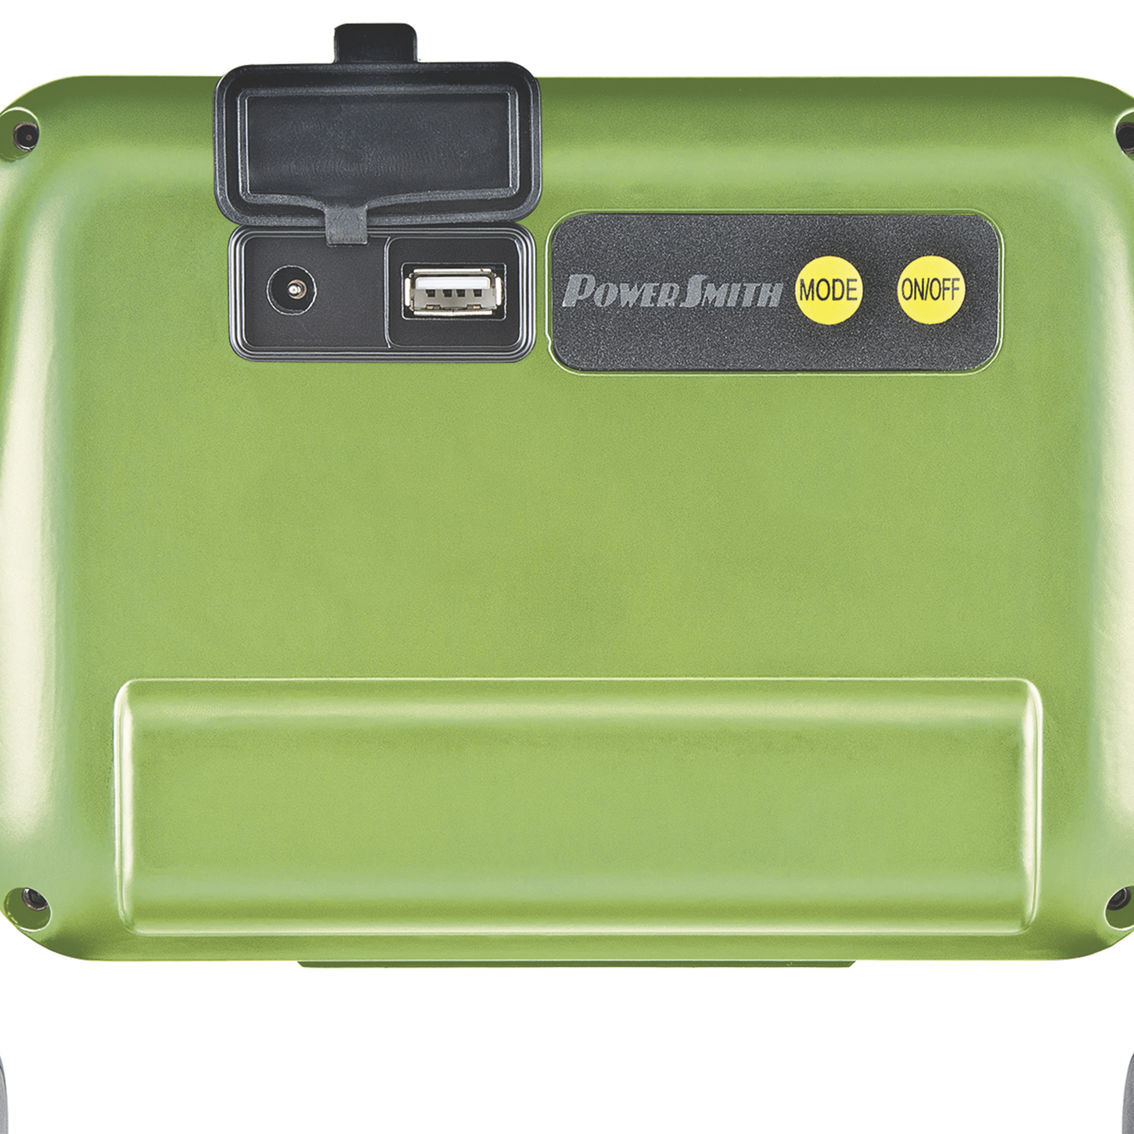 PowerSmith 2400LM Rechargeable LED Work Light - Image 3 of 8